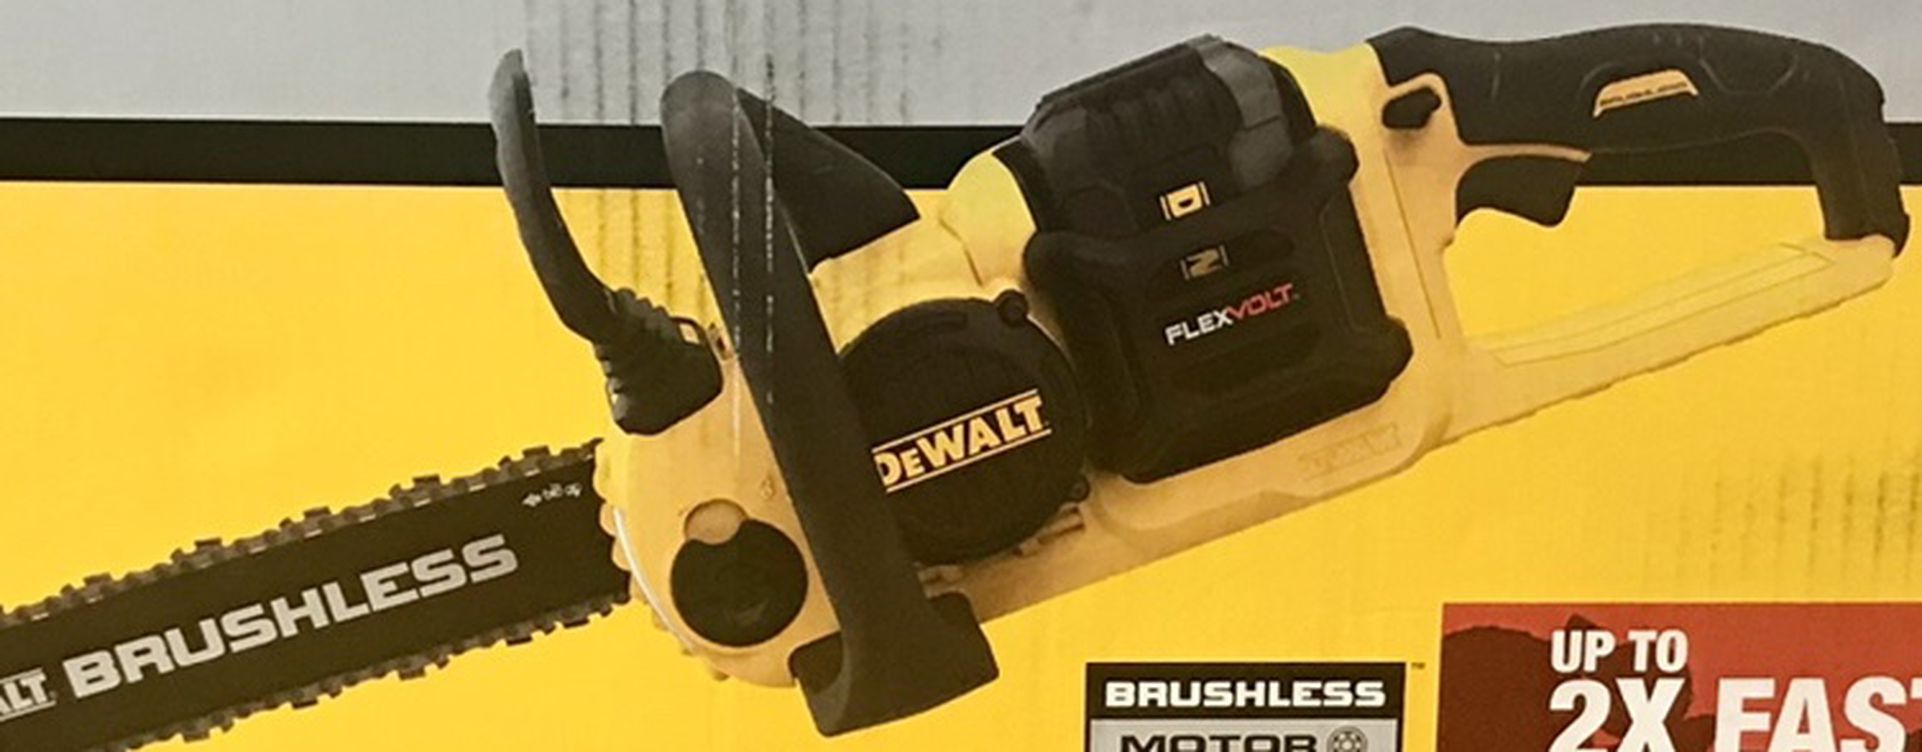 Dewalt 16 in. 60V MAX Lithium-Ion Cordless FLEXVOLT Brushless Chainsaw Battery and Charger Included